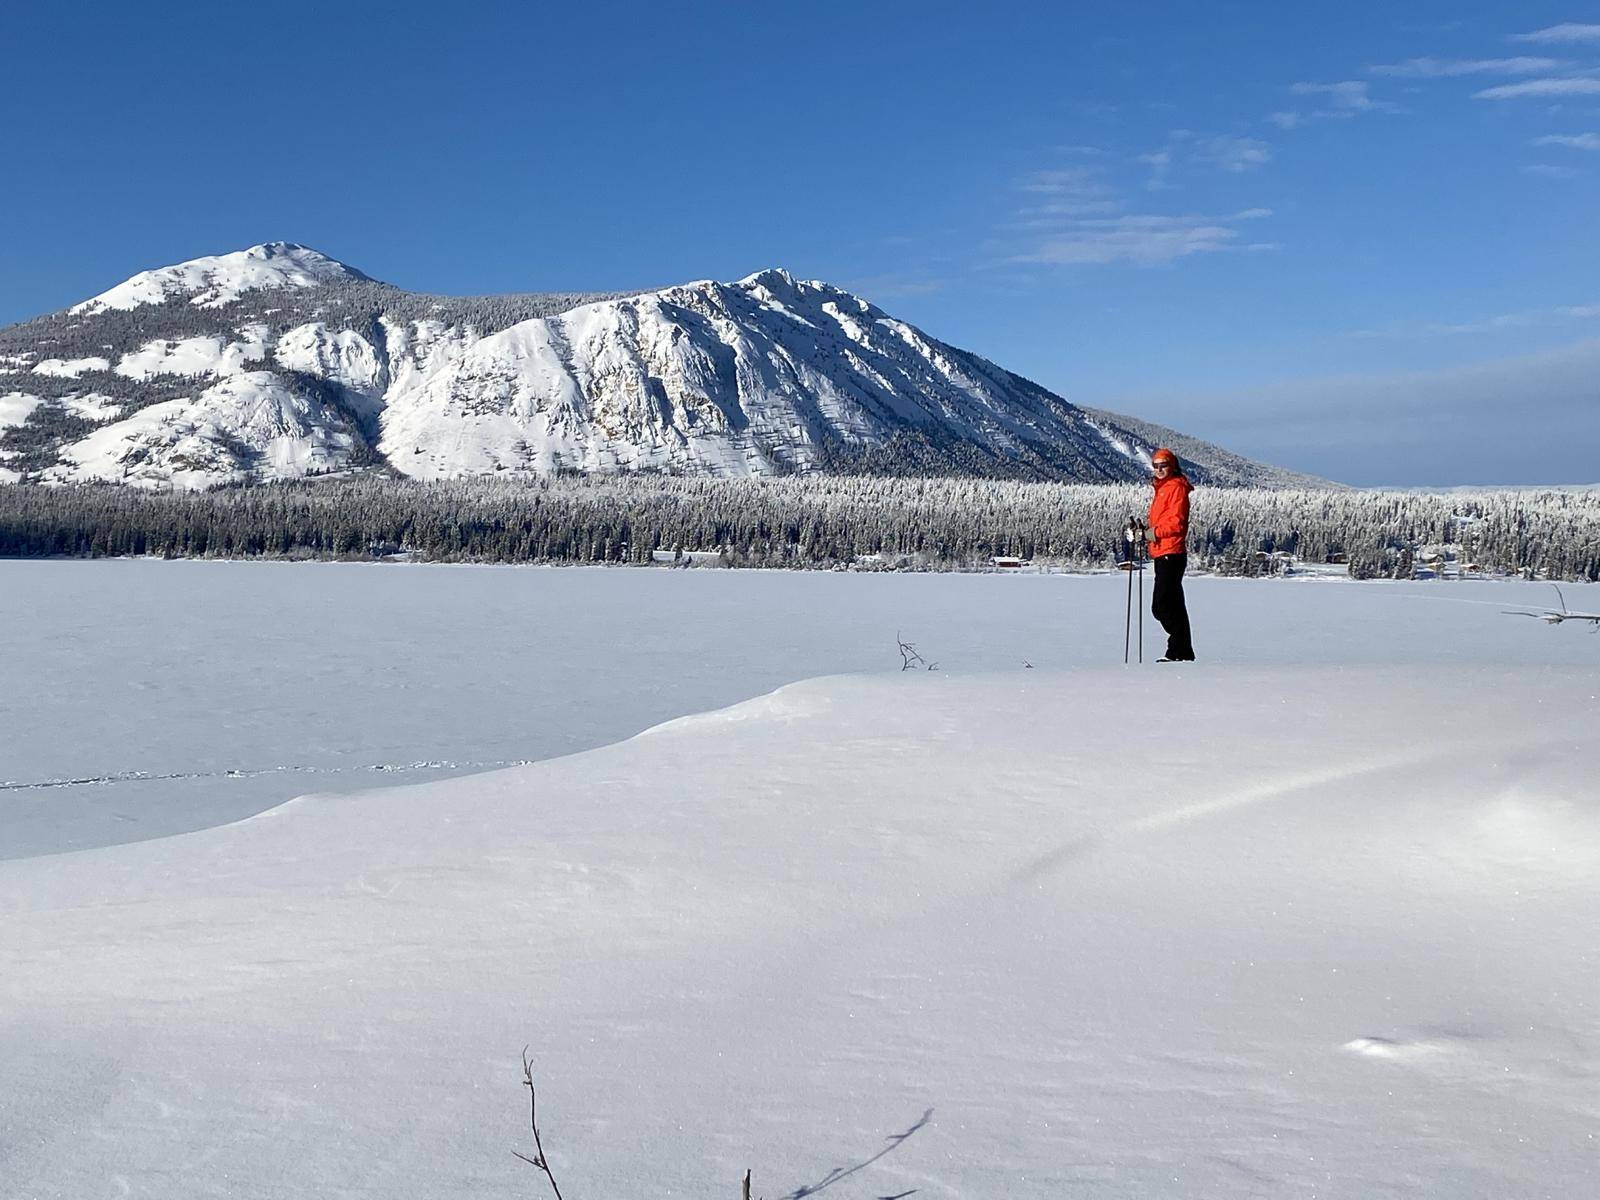 Person on skis in deep snow at frozen lake